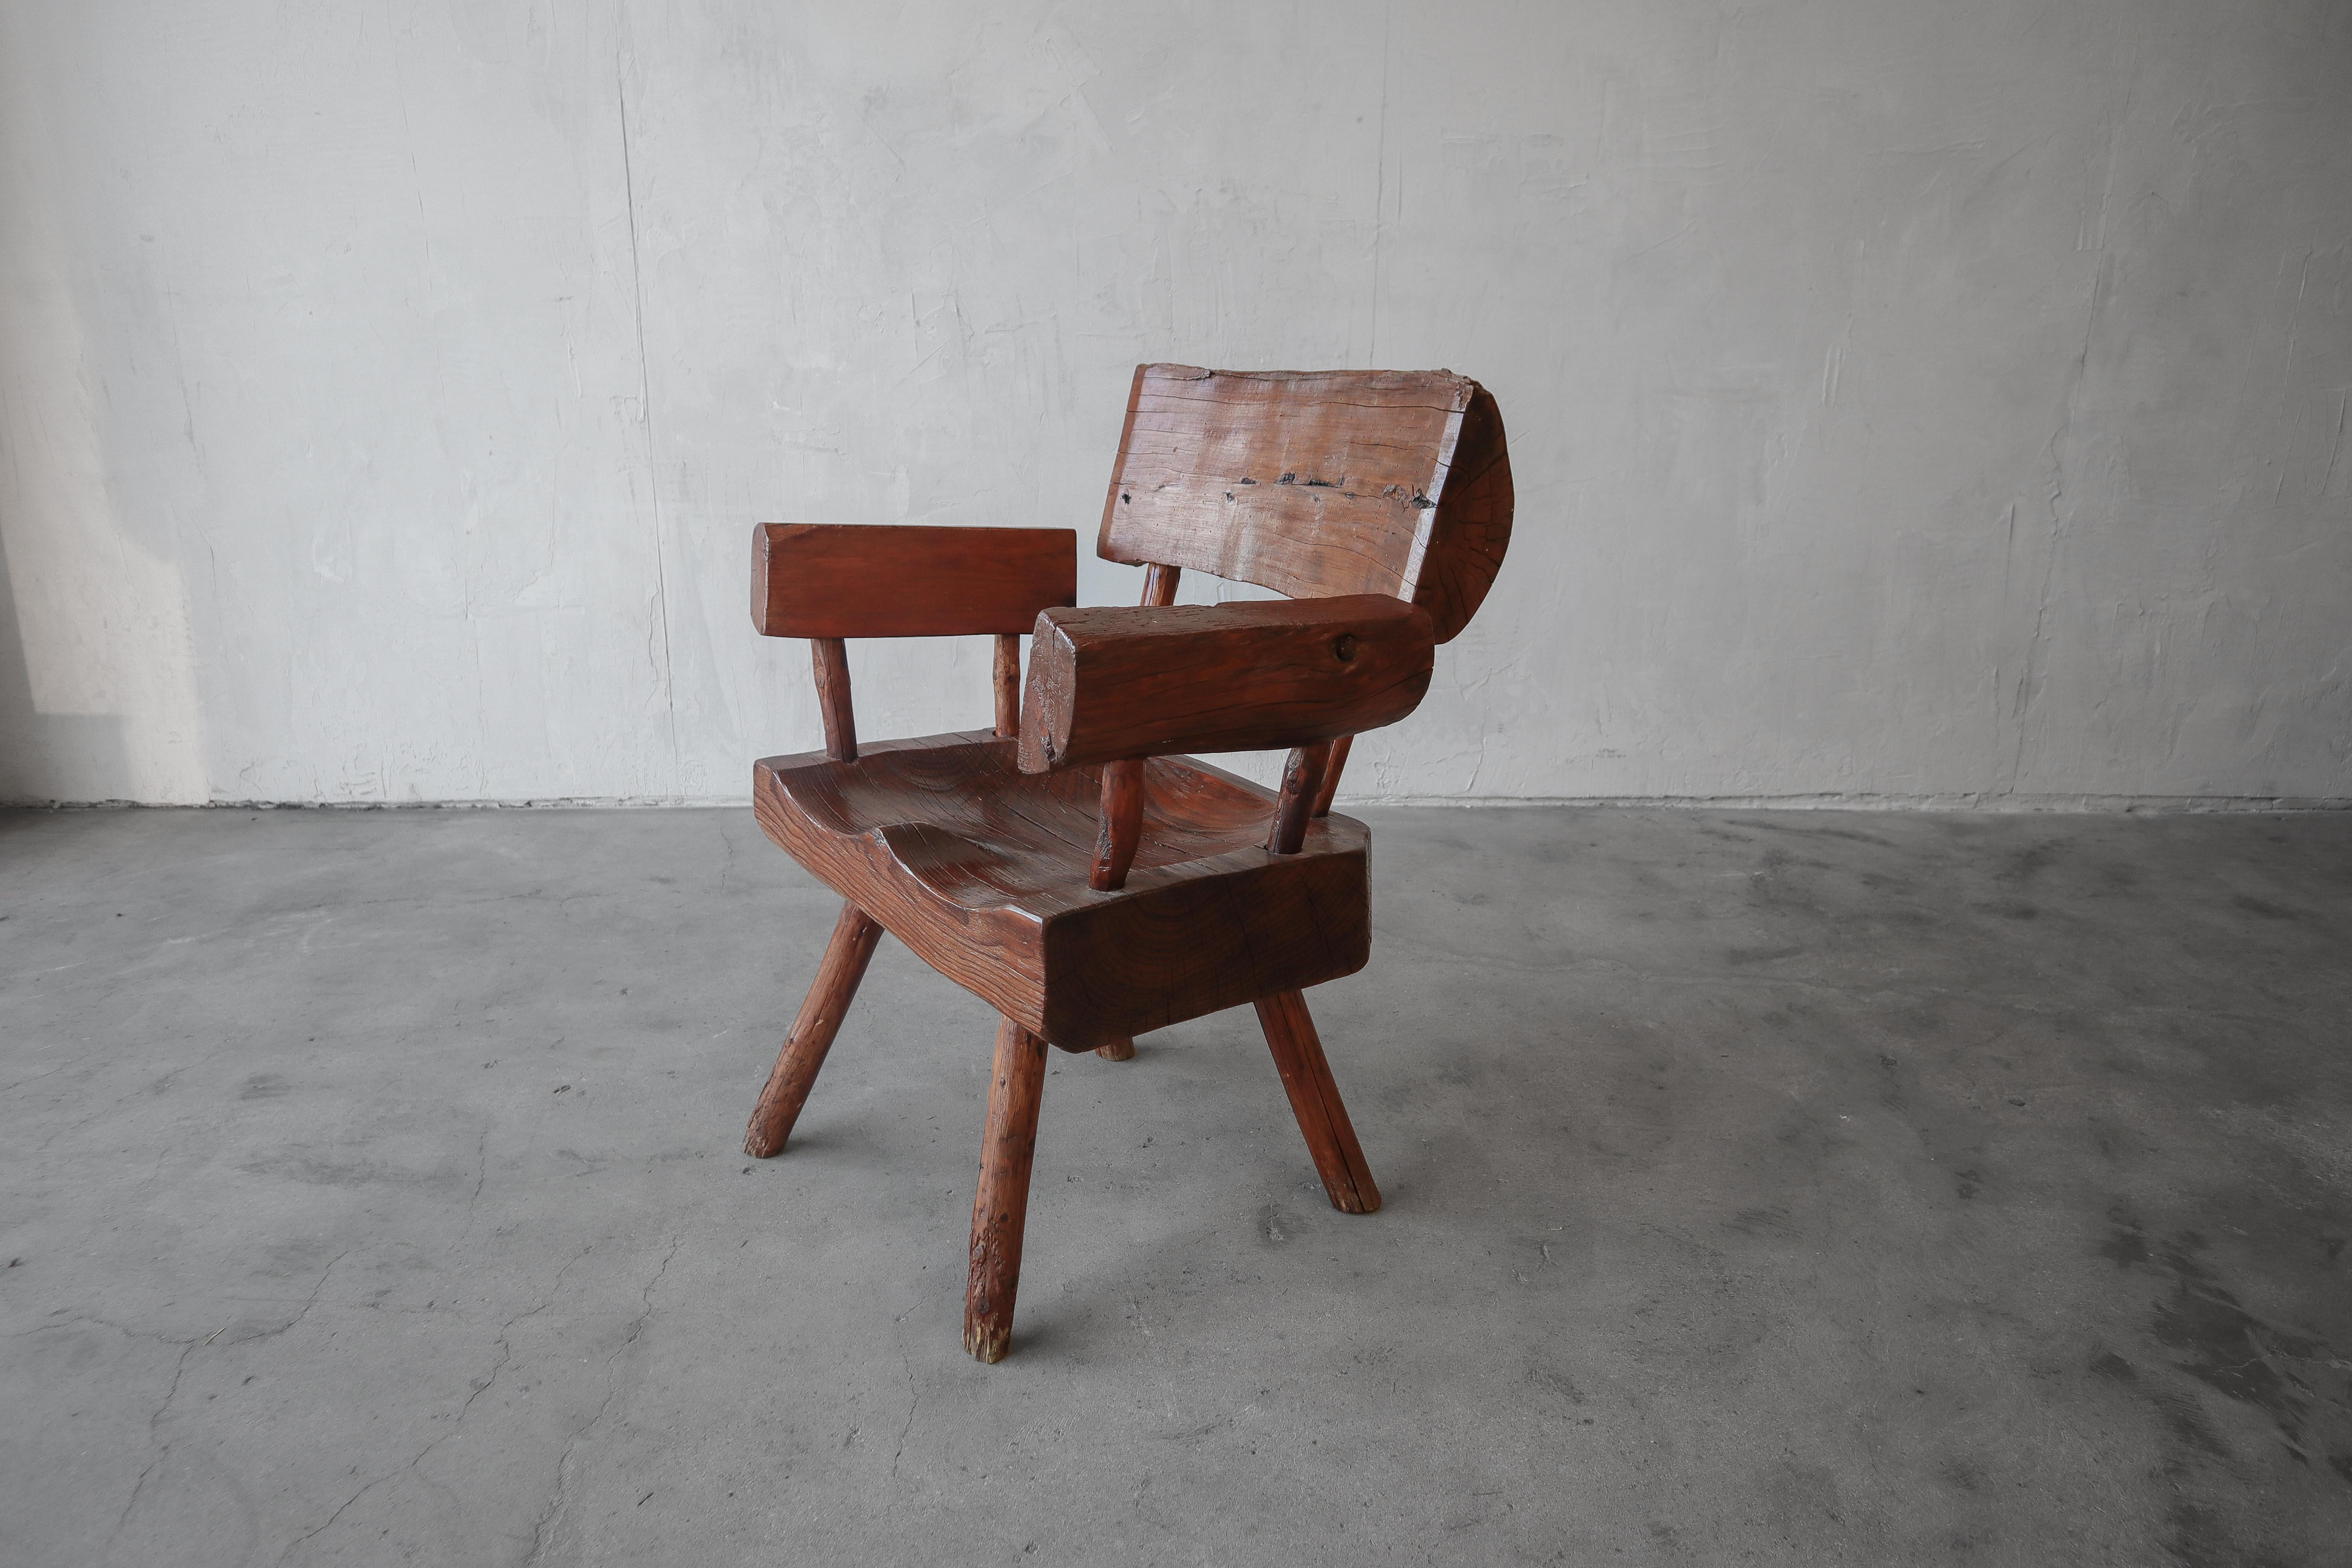 Great, primitive live edge chair. Perfect corner piece to compliment any wabisabi, minimalist or rustic decor.

Chair has natural inclusions and light wear that add to it's character. It is solid but probably best used as decor.